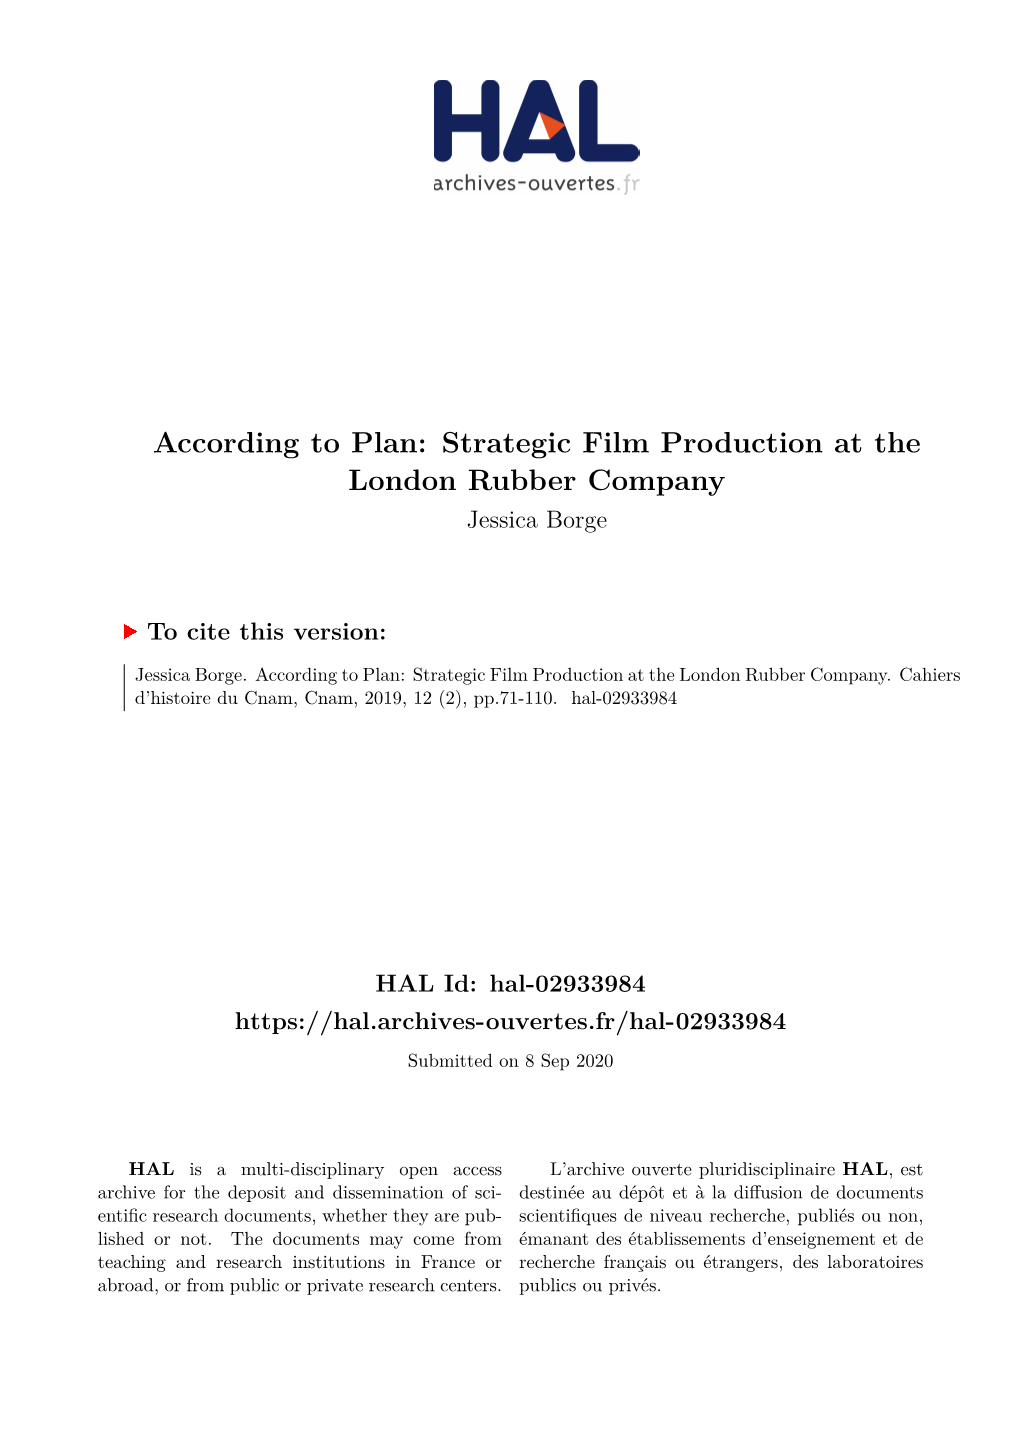 According to Plan: Strategic Film Production at the London Rubber Company Jessica Borge